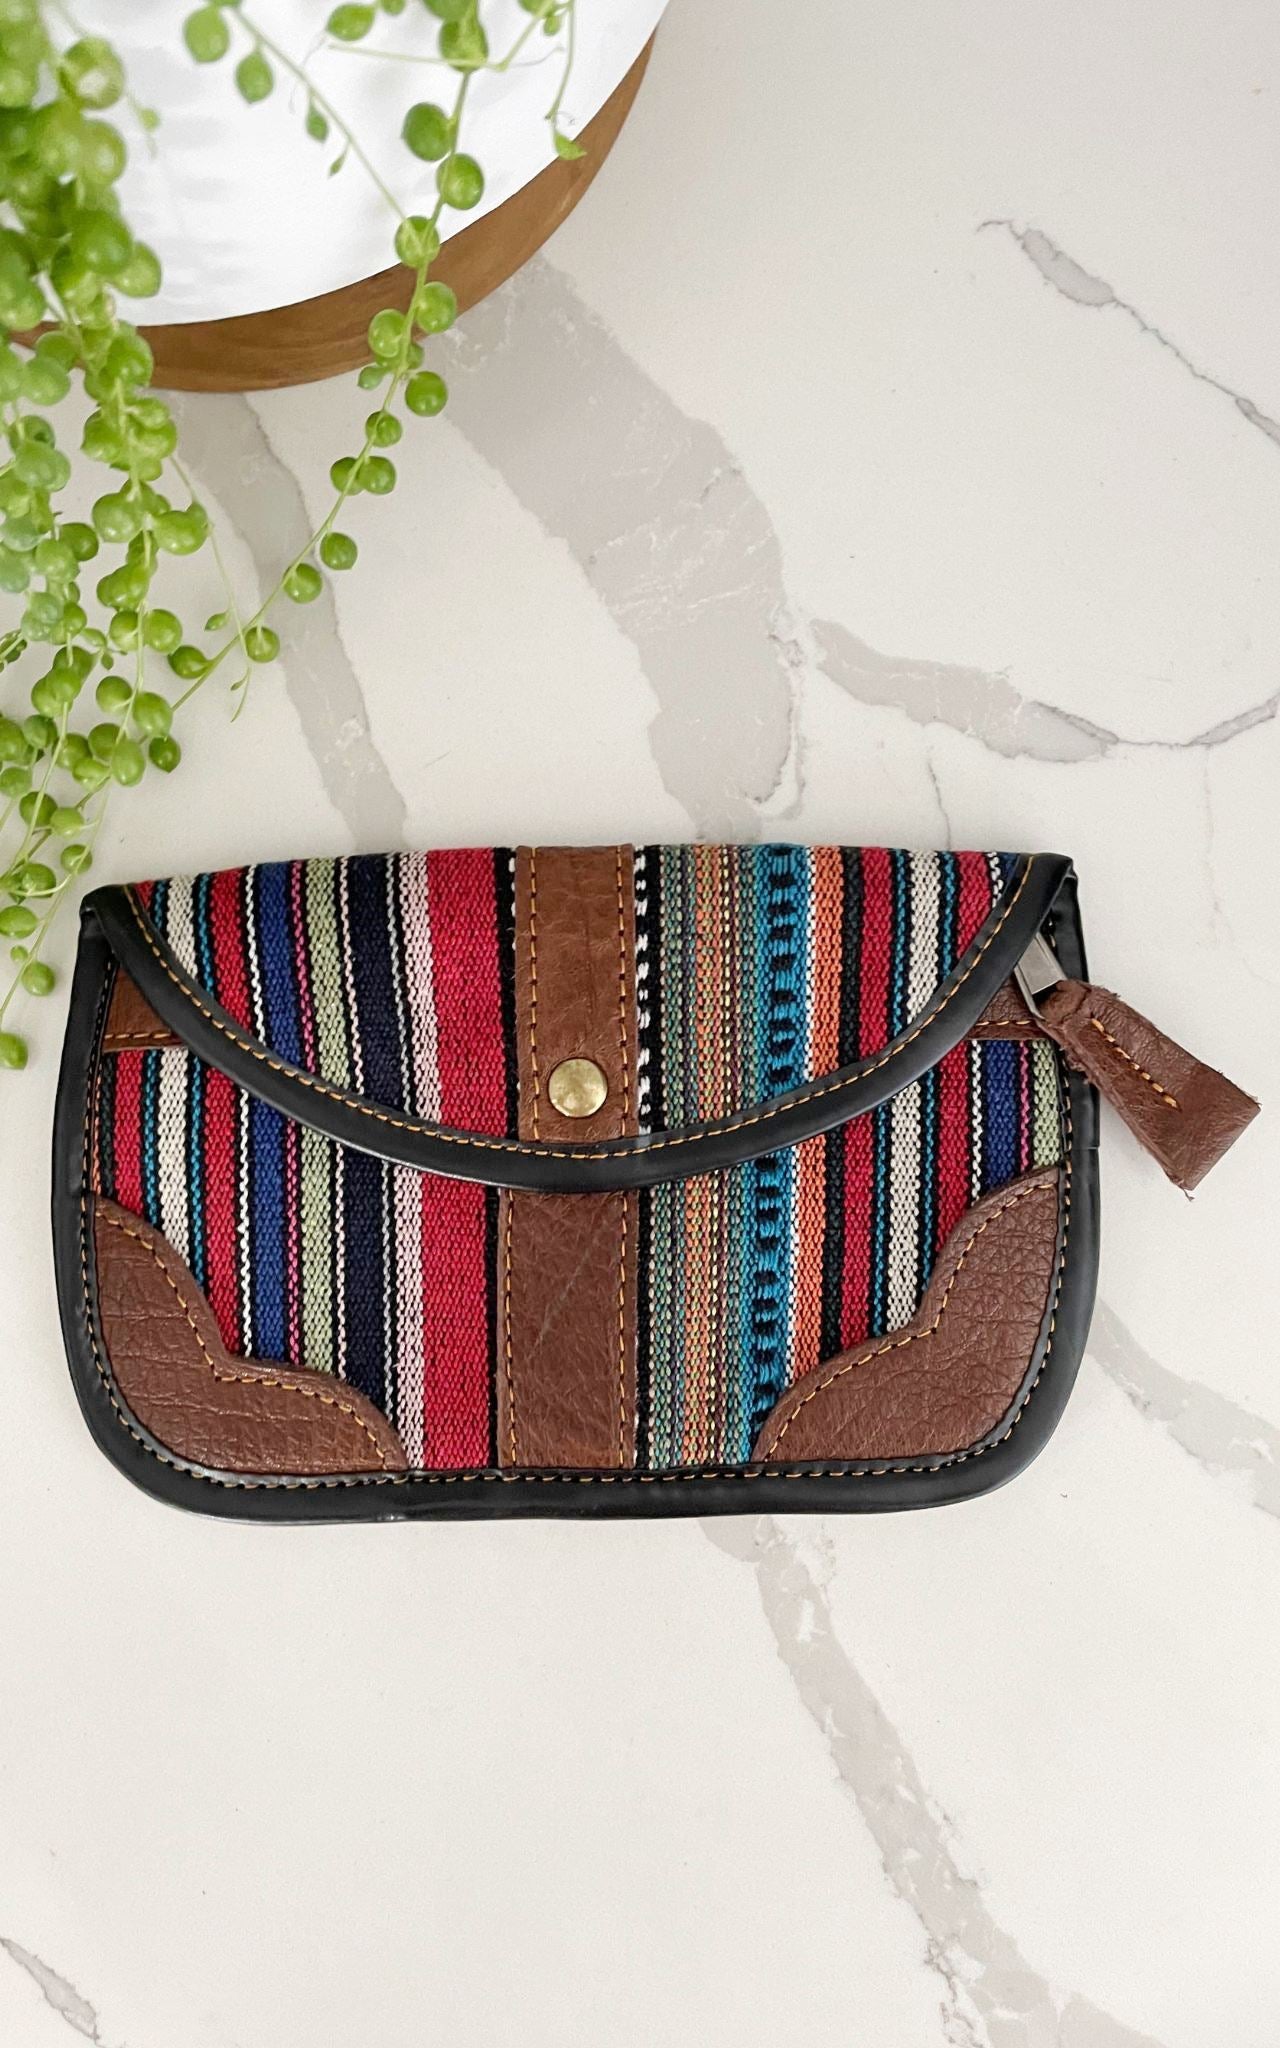 Surya Australia Ethical Buffalo Leather + Woven Cotton Clutch Wallets from Nepal - Taral